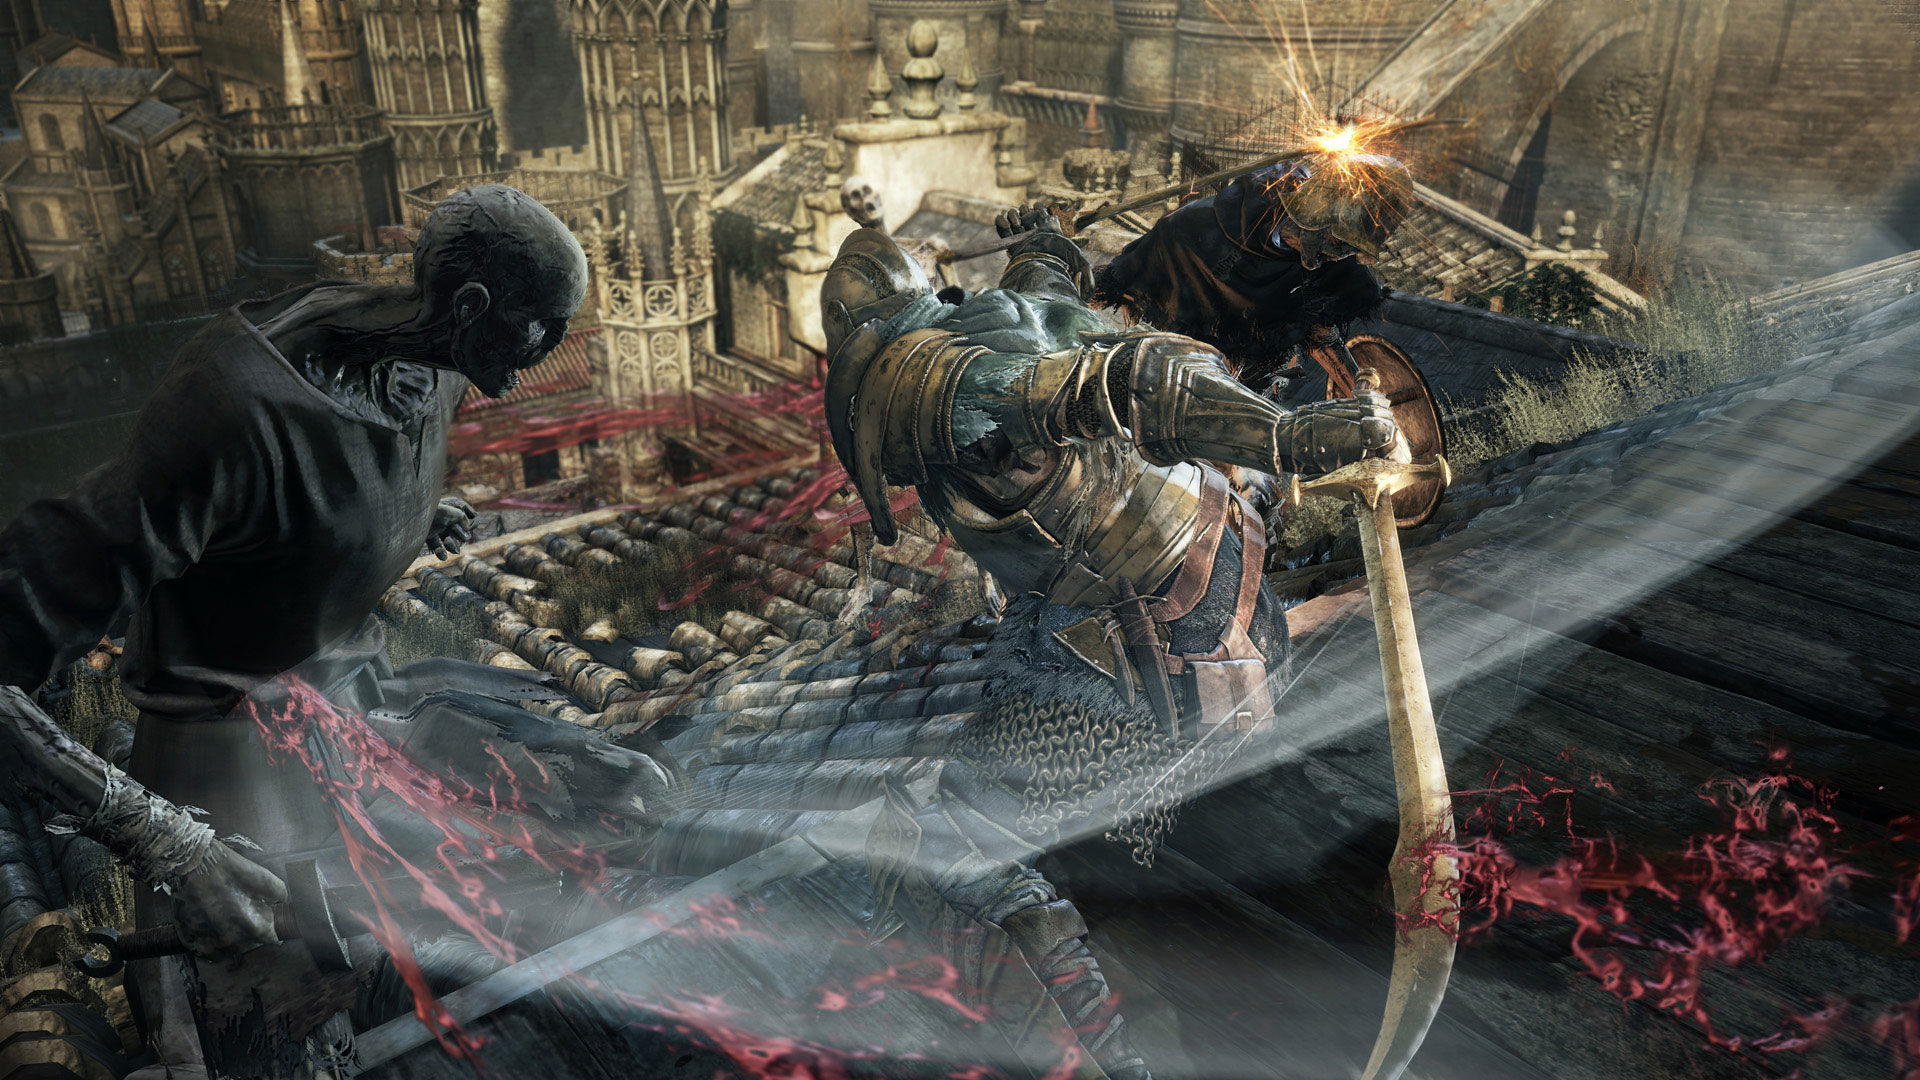 Dark Souls III Launching in North America and Europe in April 2016